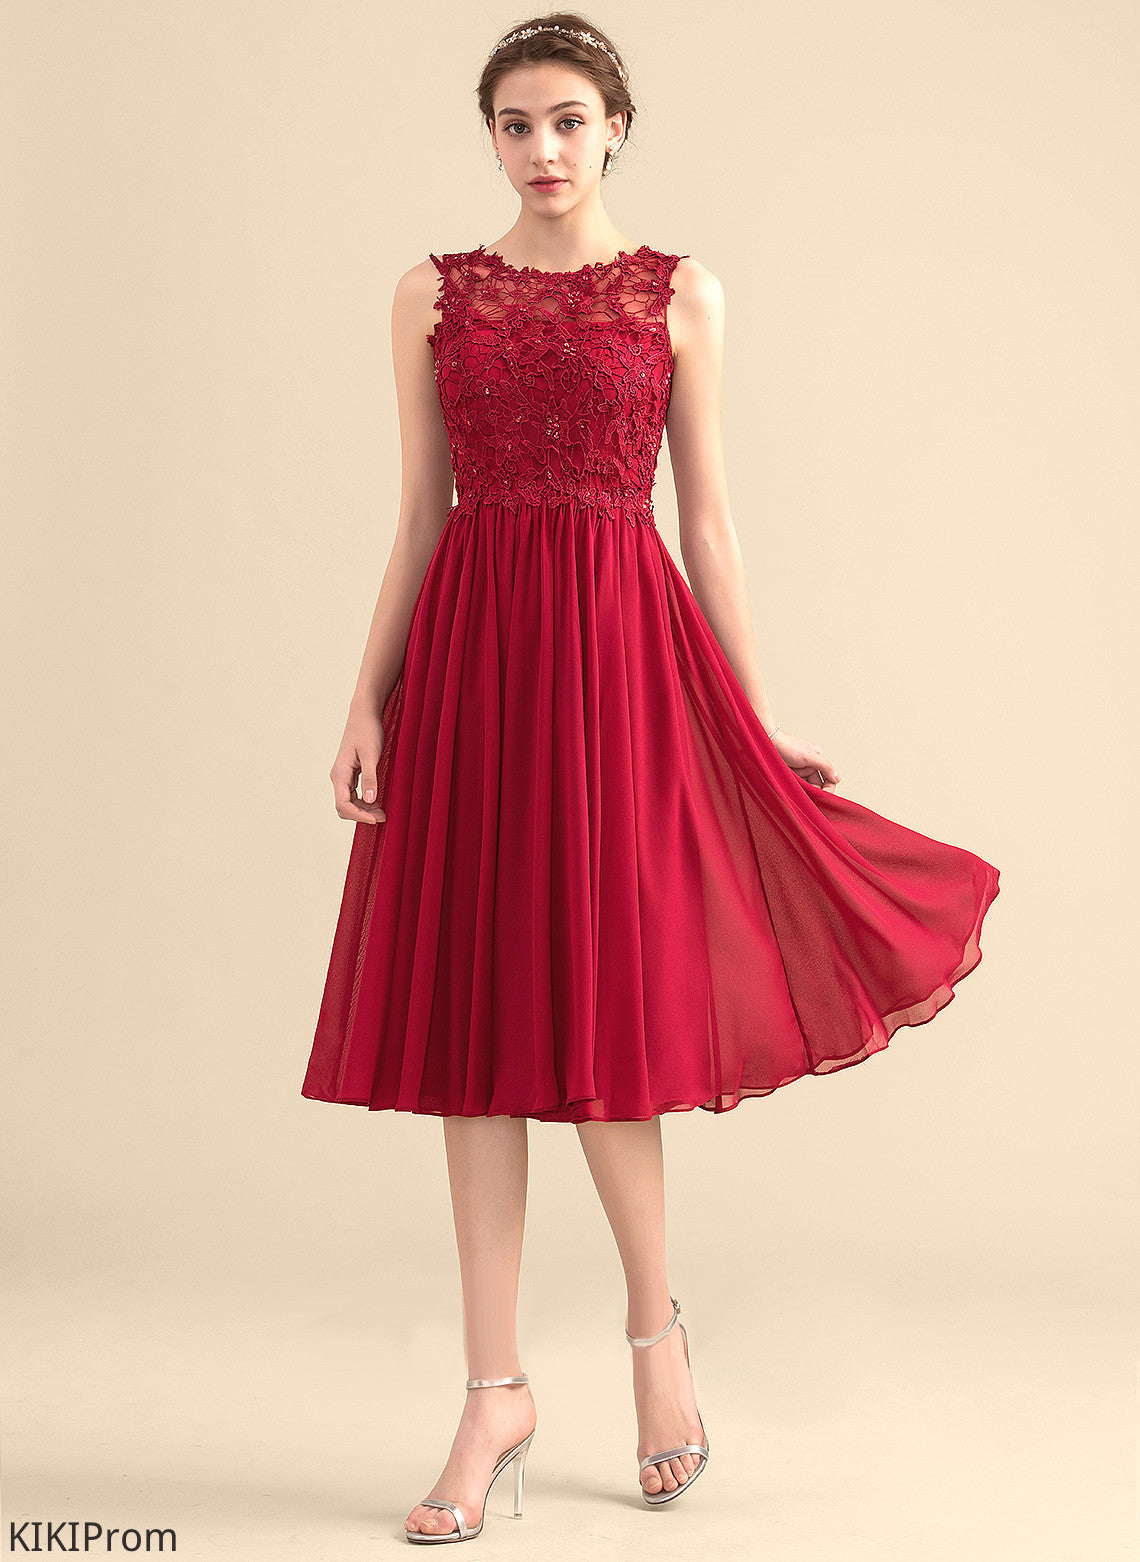 Beading Scoop A-Line Lace Lace Knee-Length Homecoming With Neck Homecoming Dresses Dress Chasity Chiffon